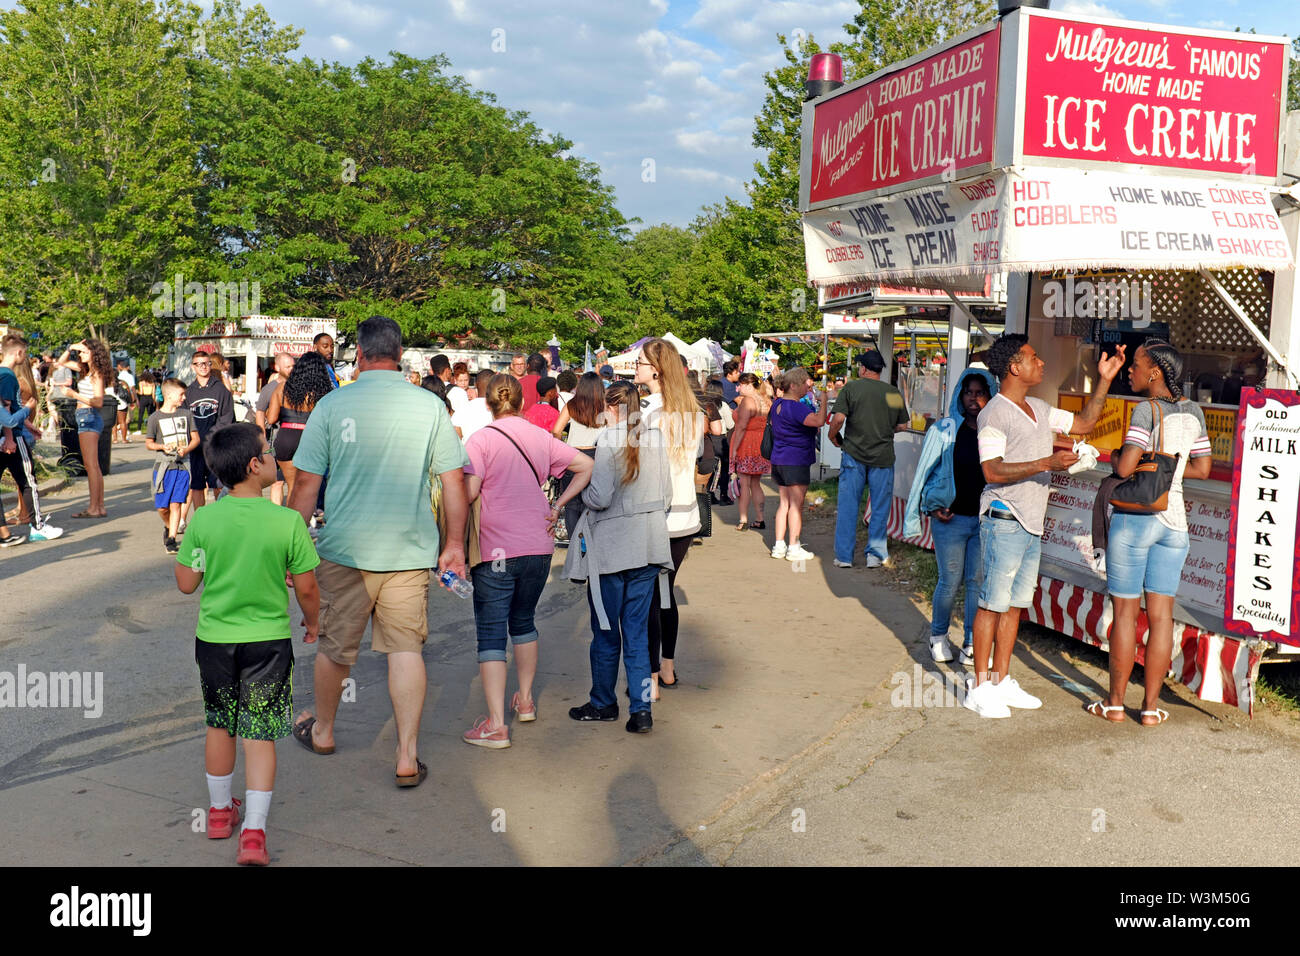 Small-town carnival in middle America shows a diversity of people while the old-school charm of comfort food stands are patronized in Northeast Ohio. Stock Photo